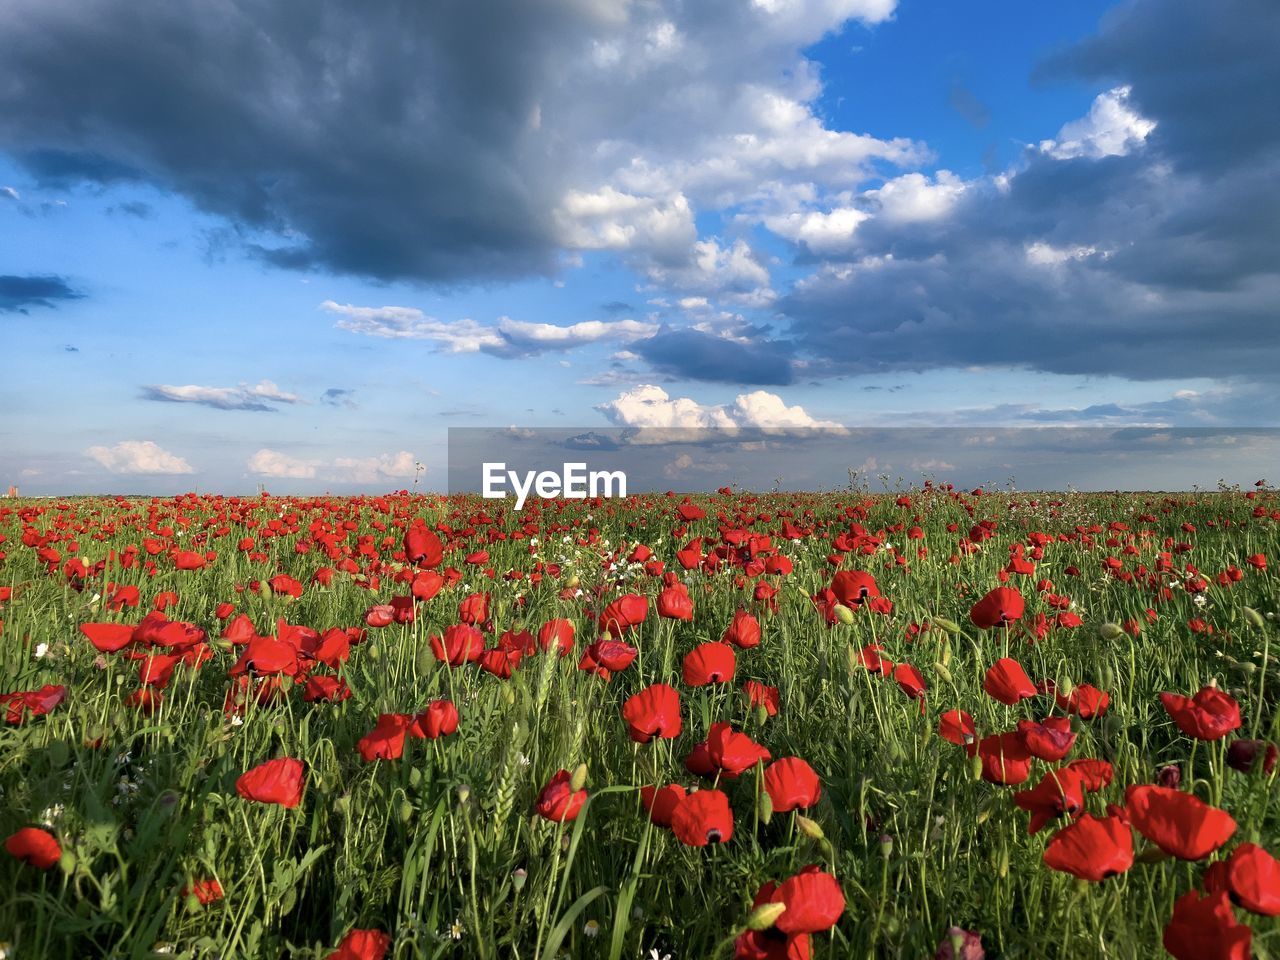 Clouds over field of poppies 